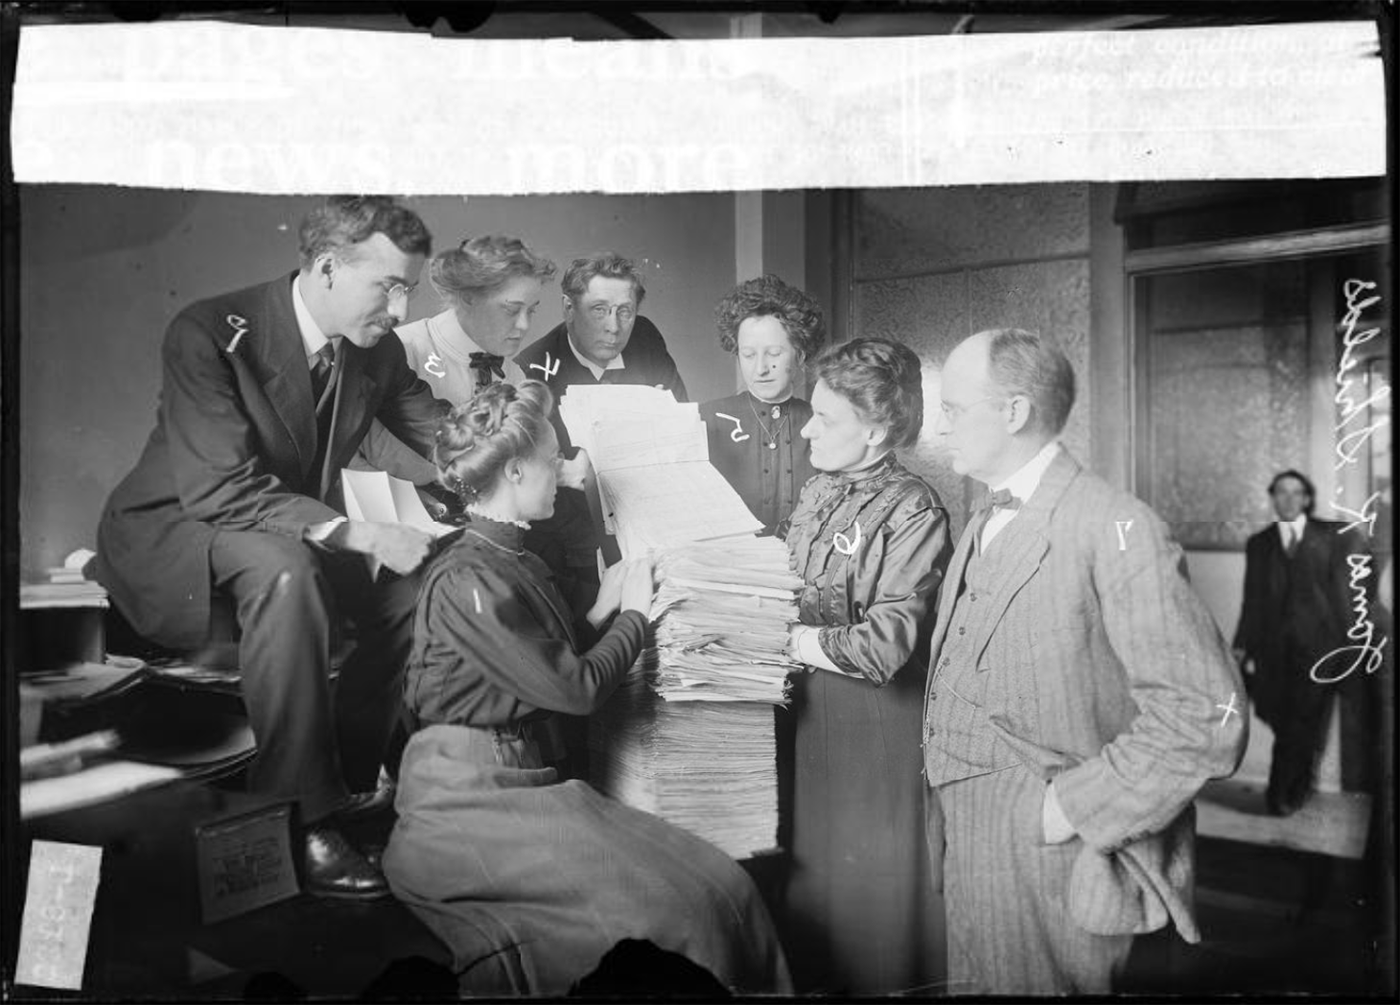 Members of the Anti-Saloon League in 1910 posing with a petition. Photo: Chicago Daily News, Chicago Historical Society